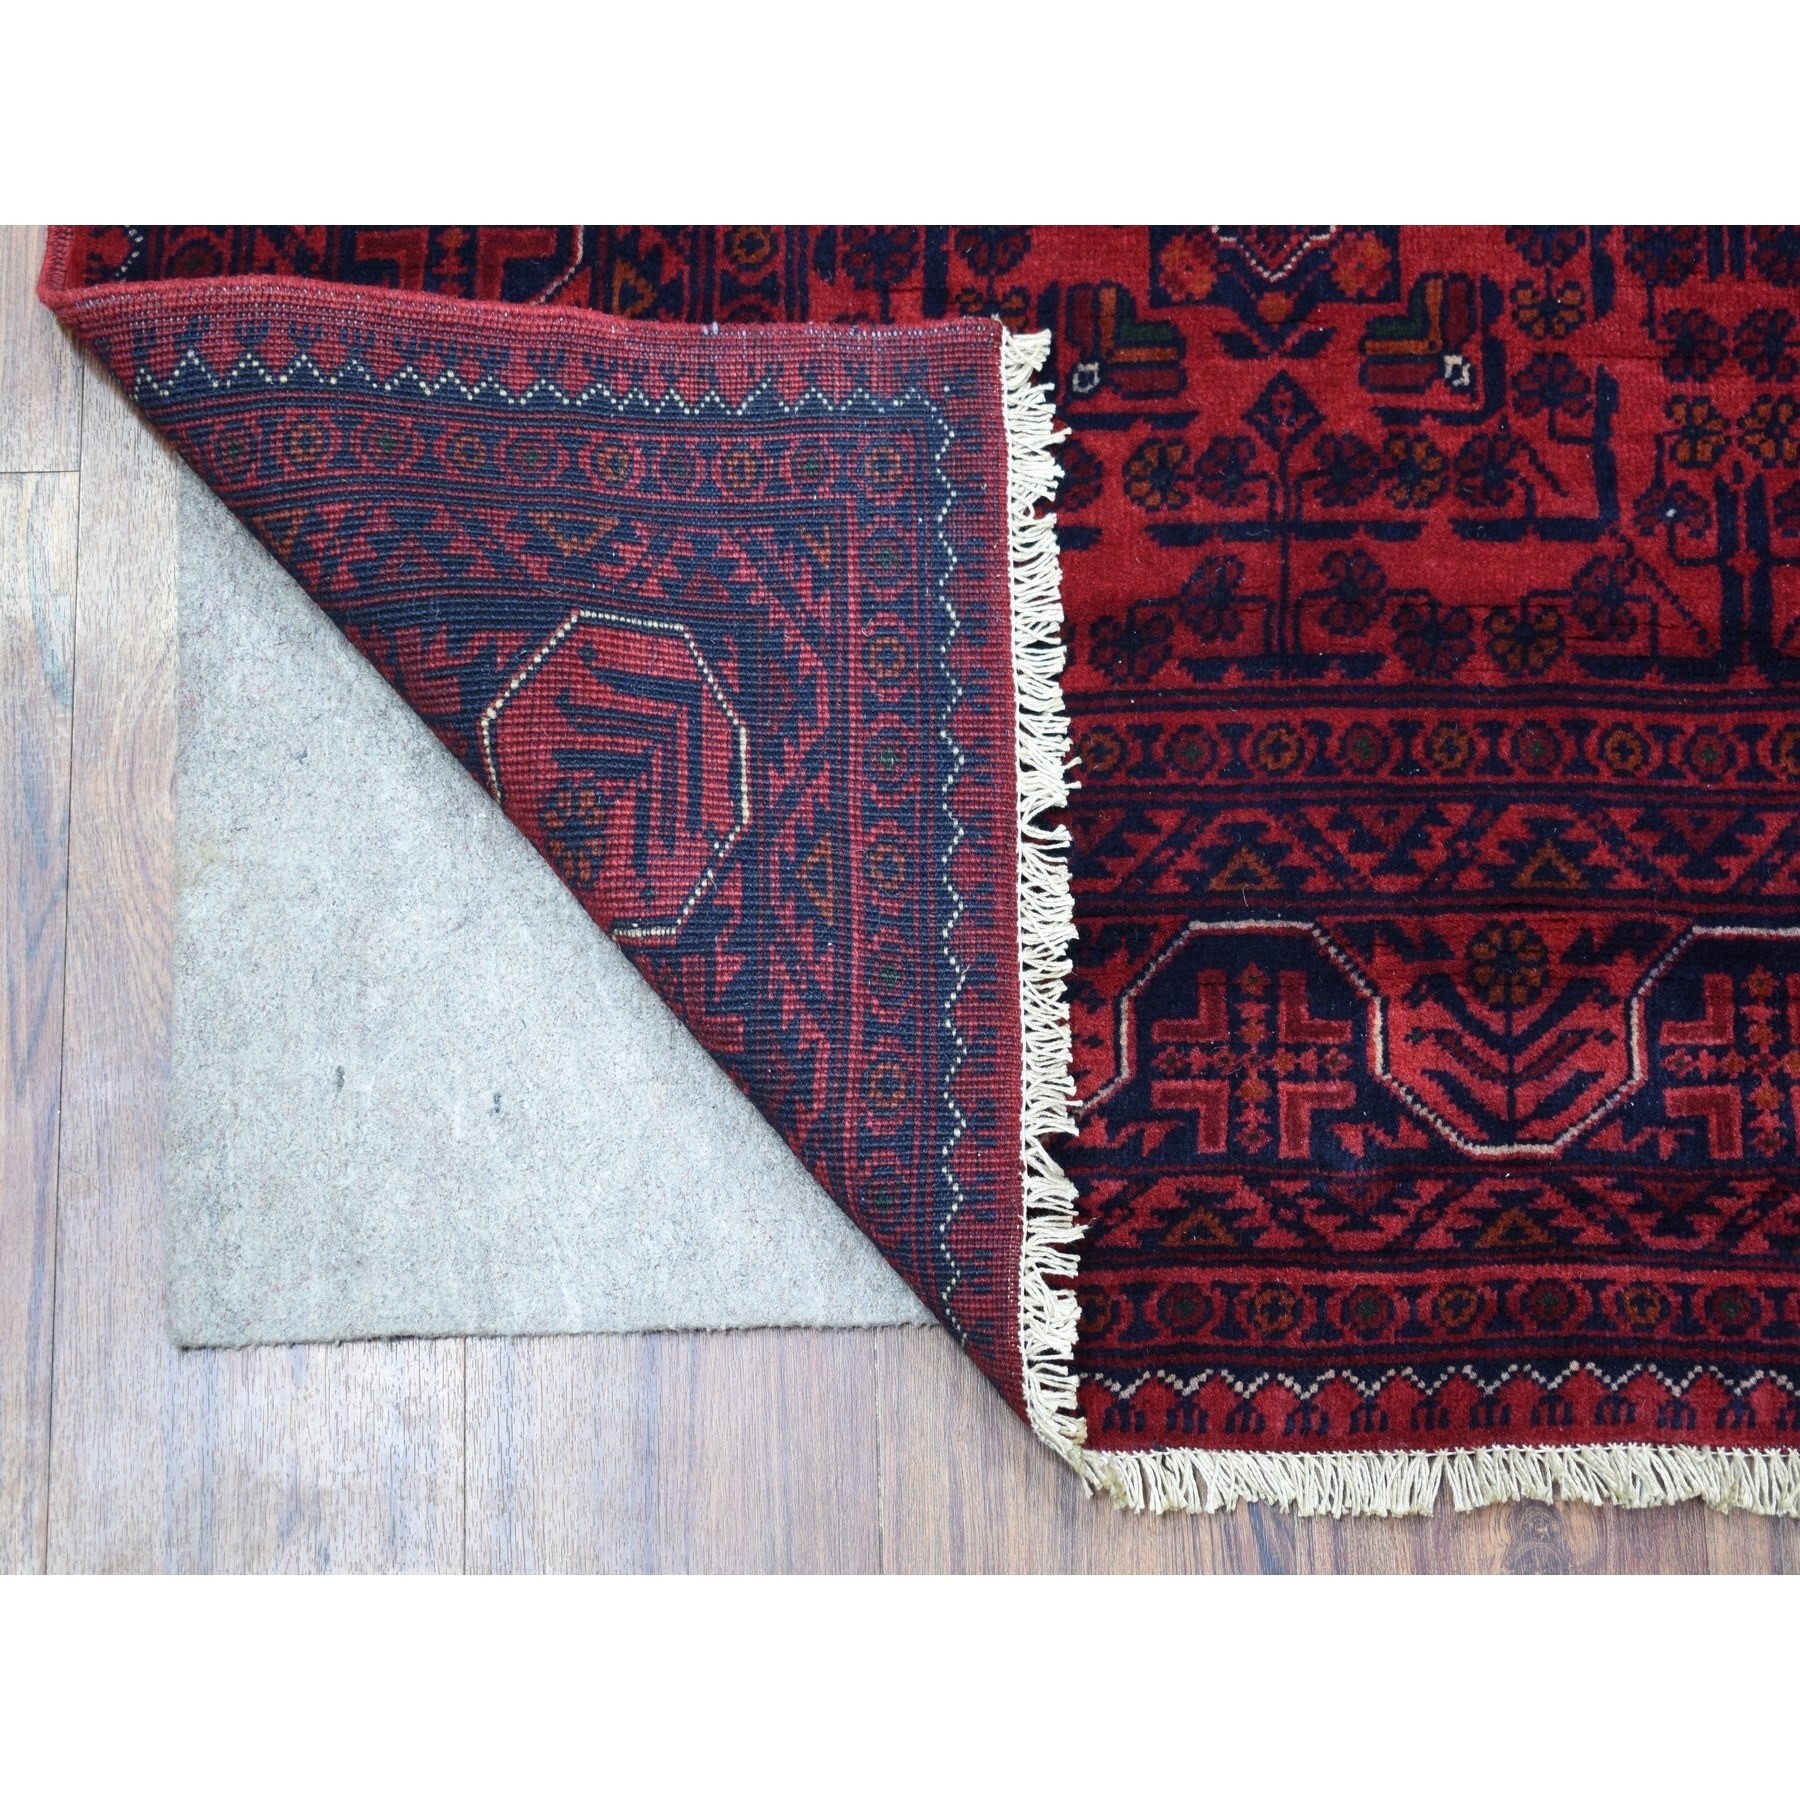 5'5"x8'7" Afghan Khamyab All Over Design Natural Wool Deep and Saturated Red Hand Woven Oriental Rug 